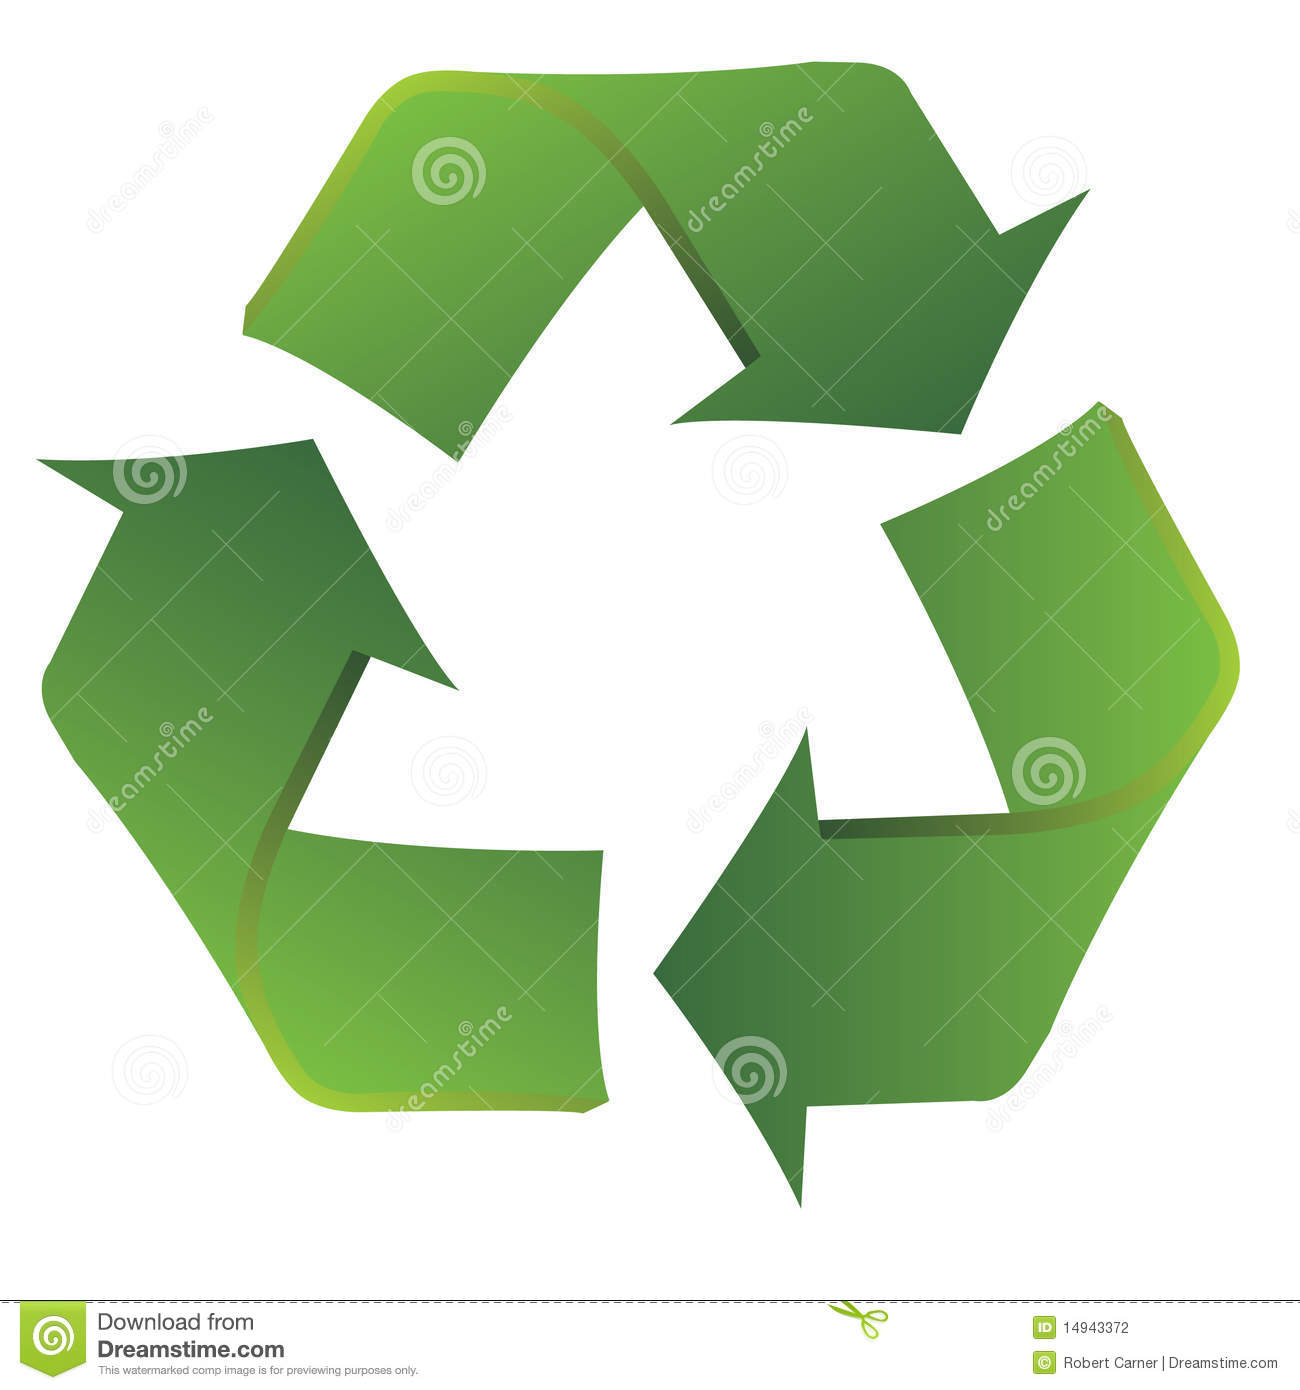 Recycle Symbol With Slight Curvatures To Show A Smooth Transition From    